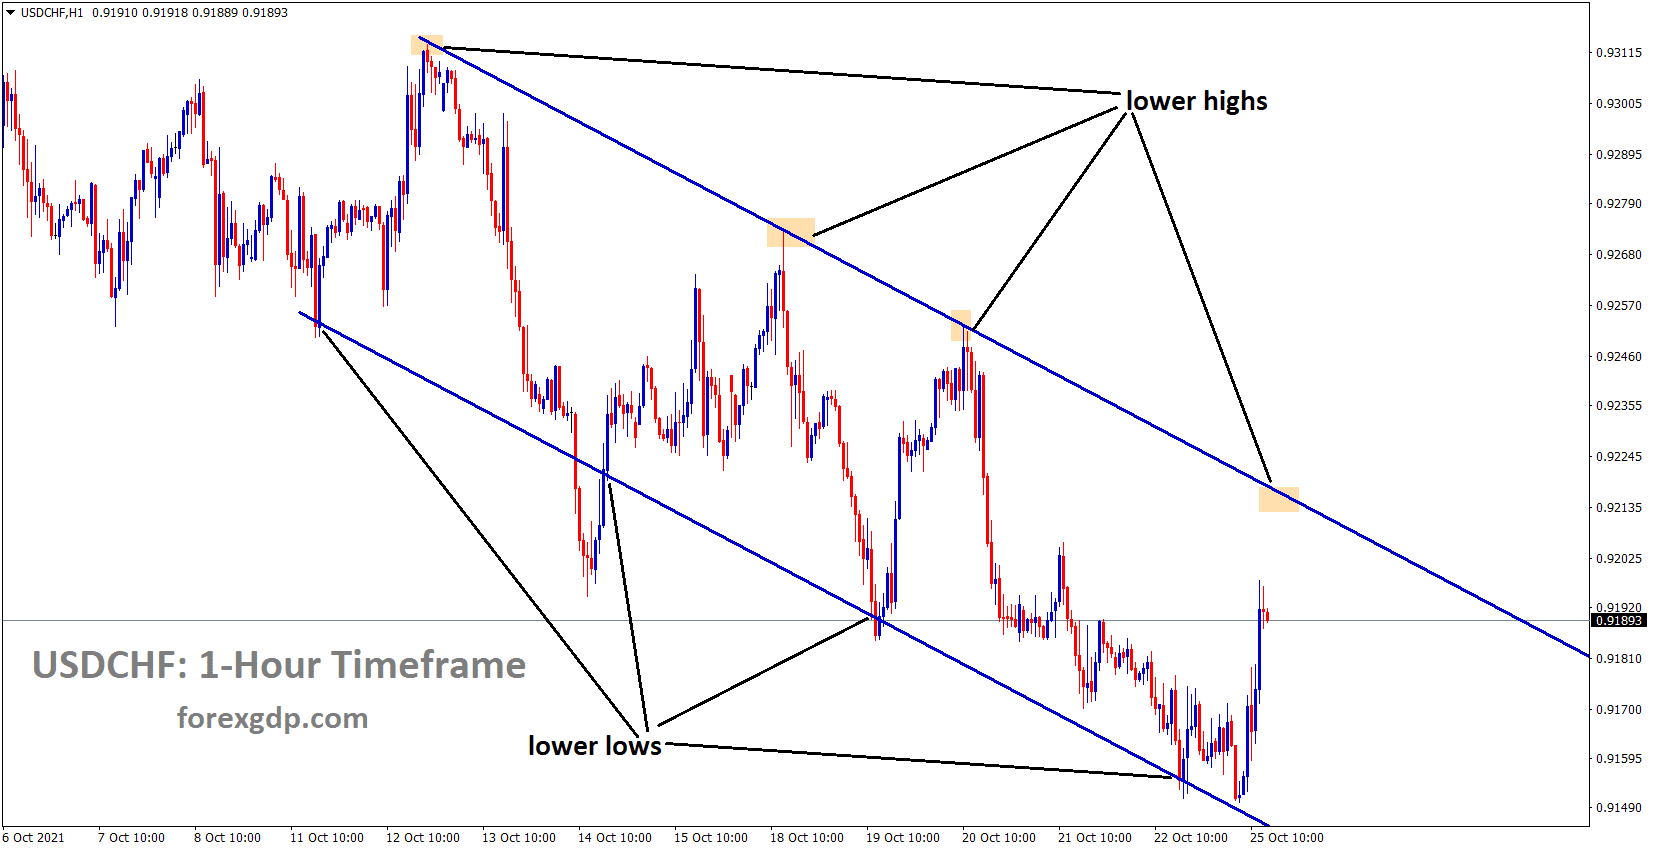 USDCHF is moving in Descending channel and lower high progress